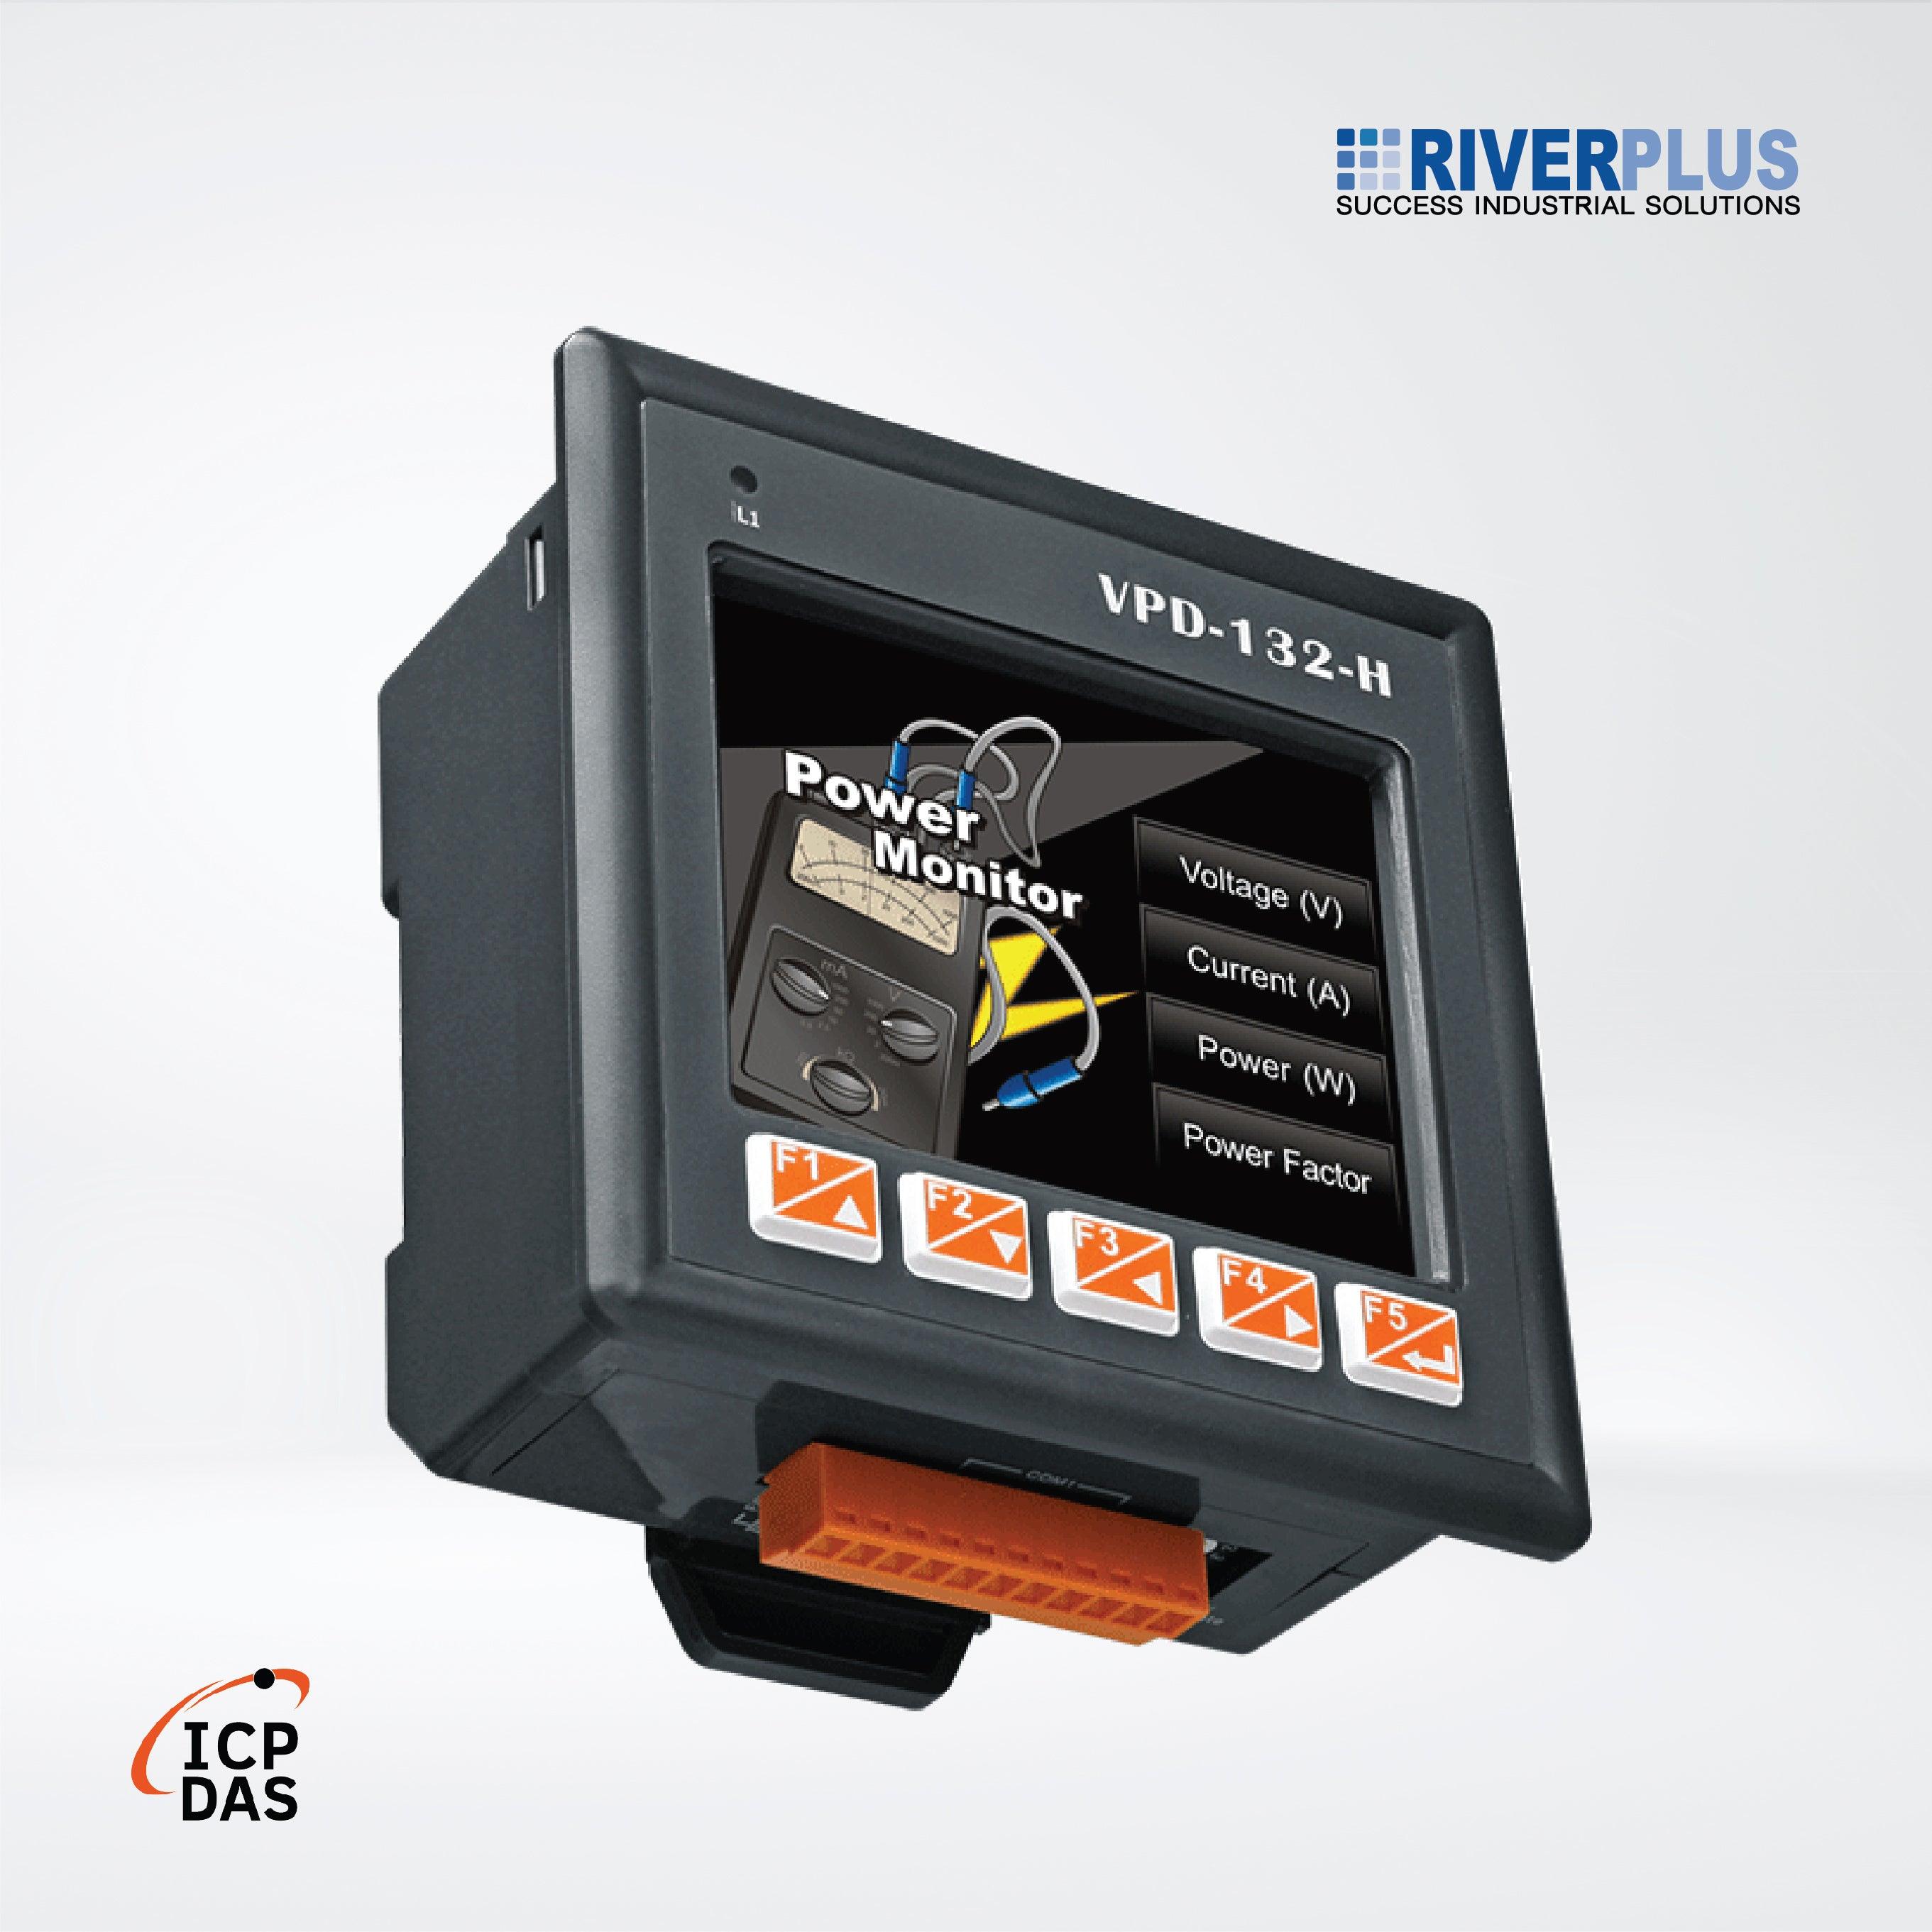 VPD-132-H 3.5" Touch HMI Device with 2 x RS-232/RS-485 and Rubber Keypad - Riverplus